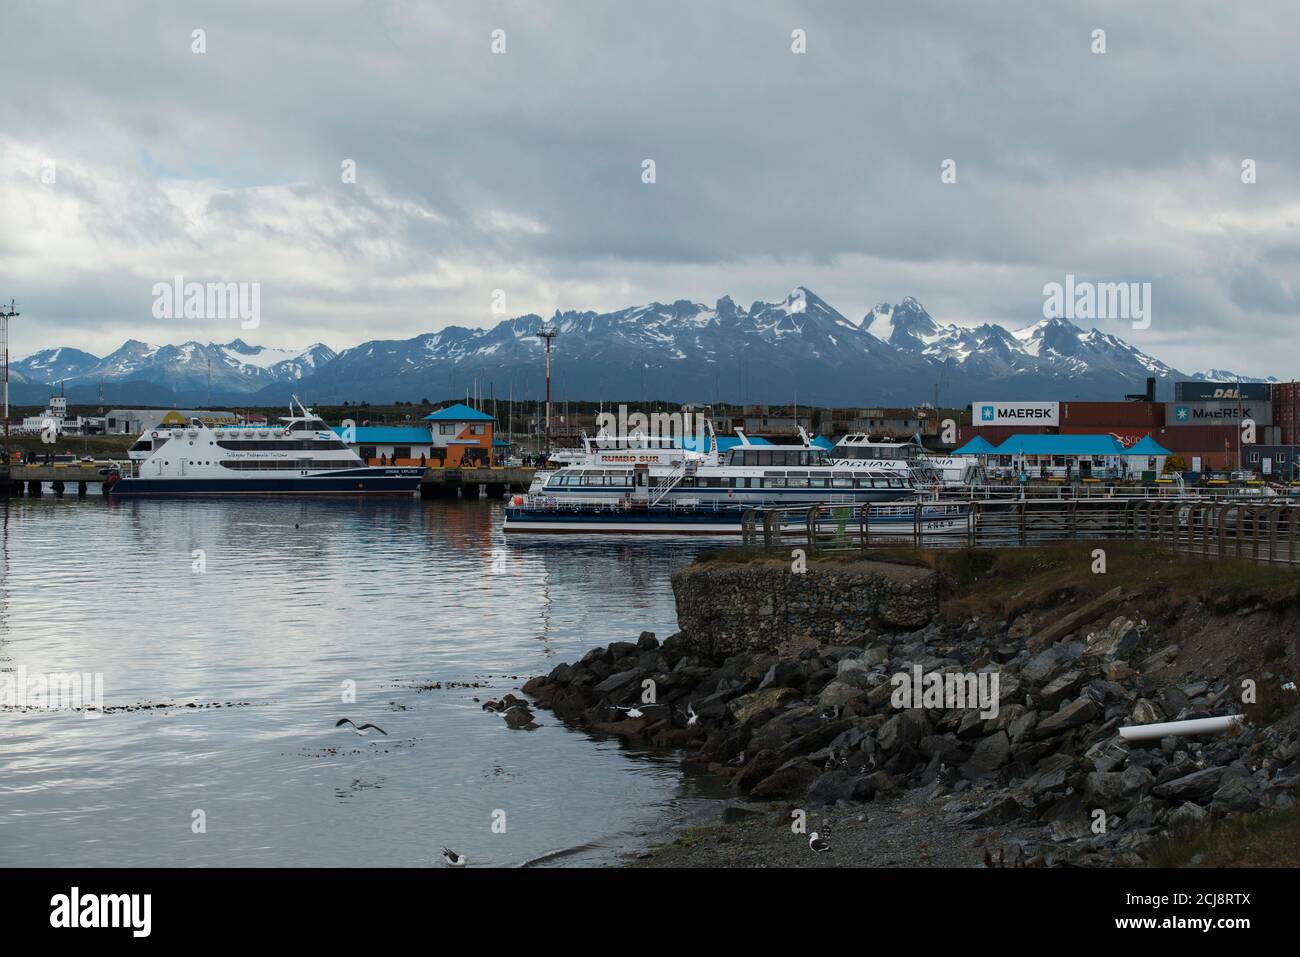 Port of Ushuaia is world’s major port of departure for tourist and scientific expeditions to the Antarctic Peninsula, Argentina, South America Stock Photo